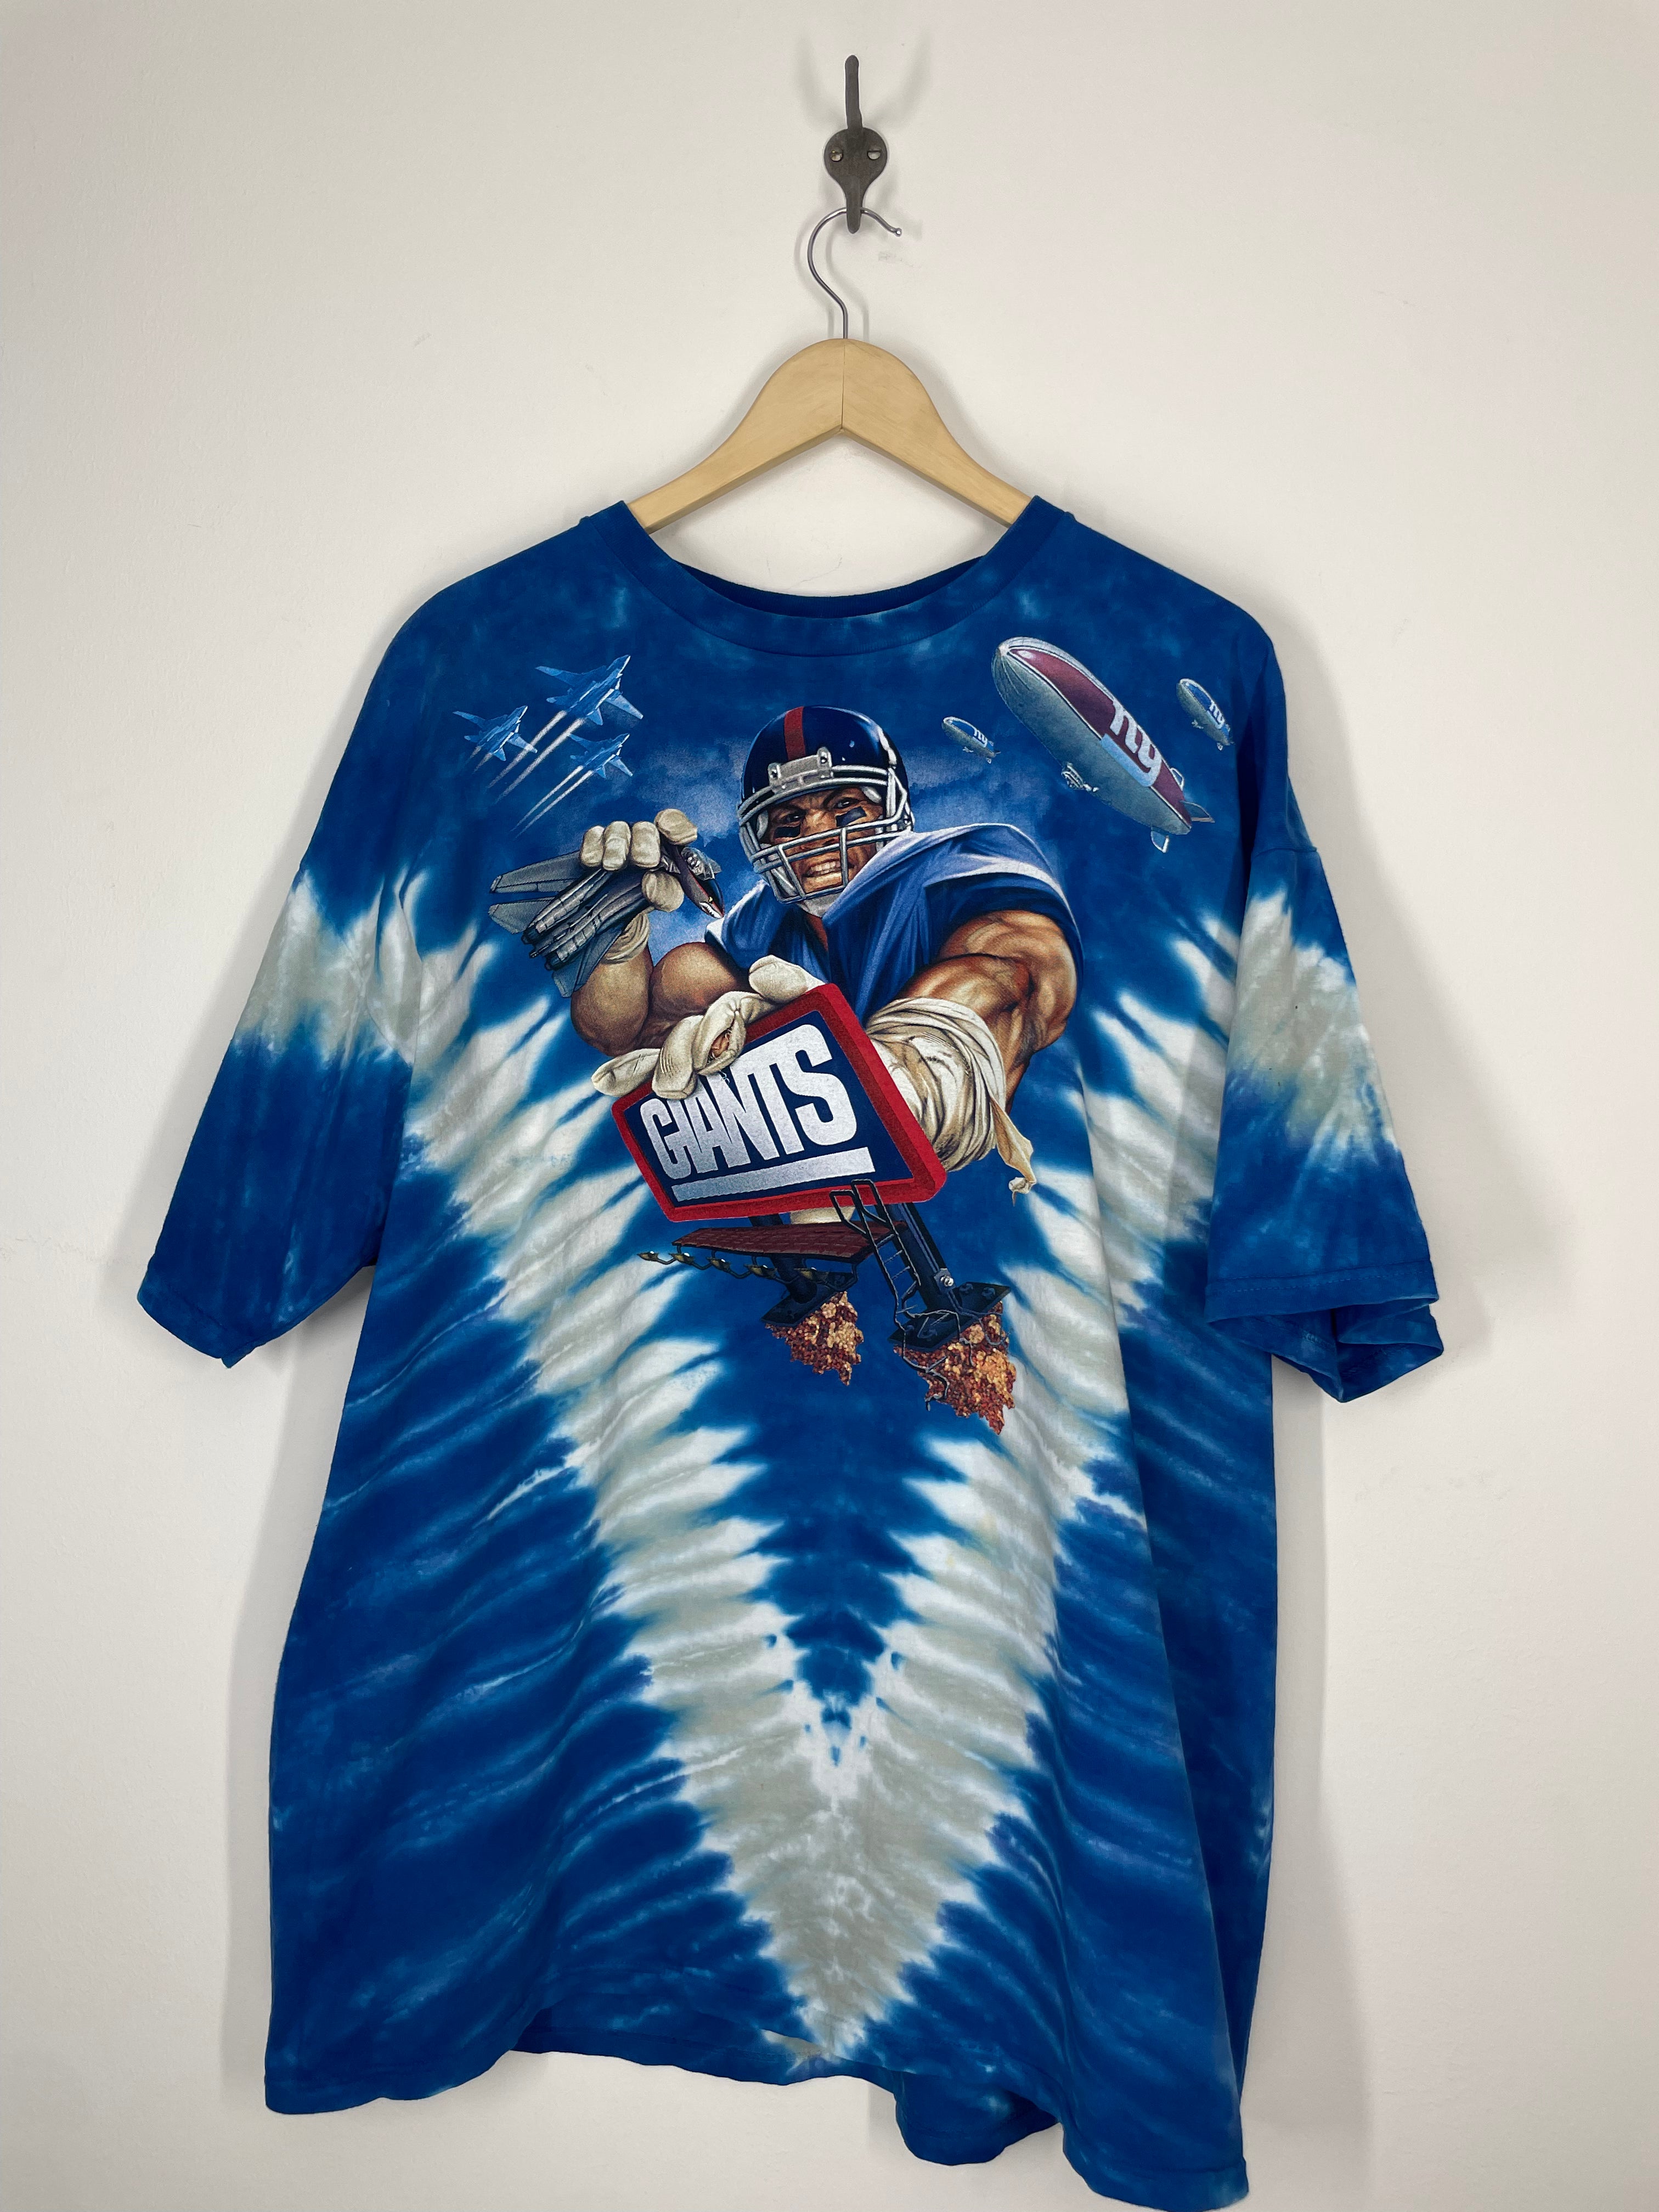 Kids NY Giants Hand Made Tie Dyed Shirt 